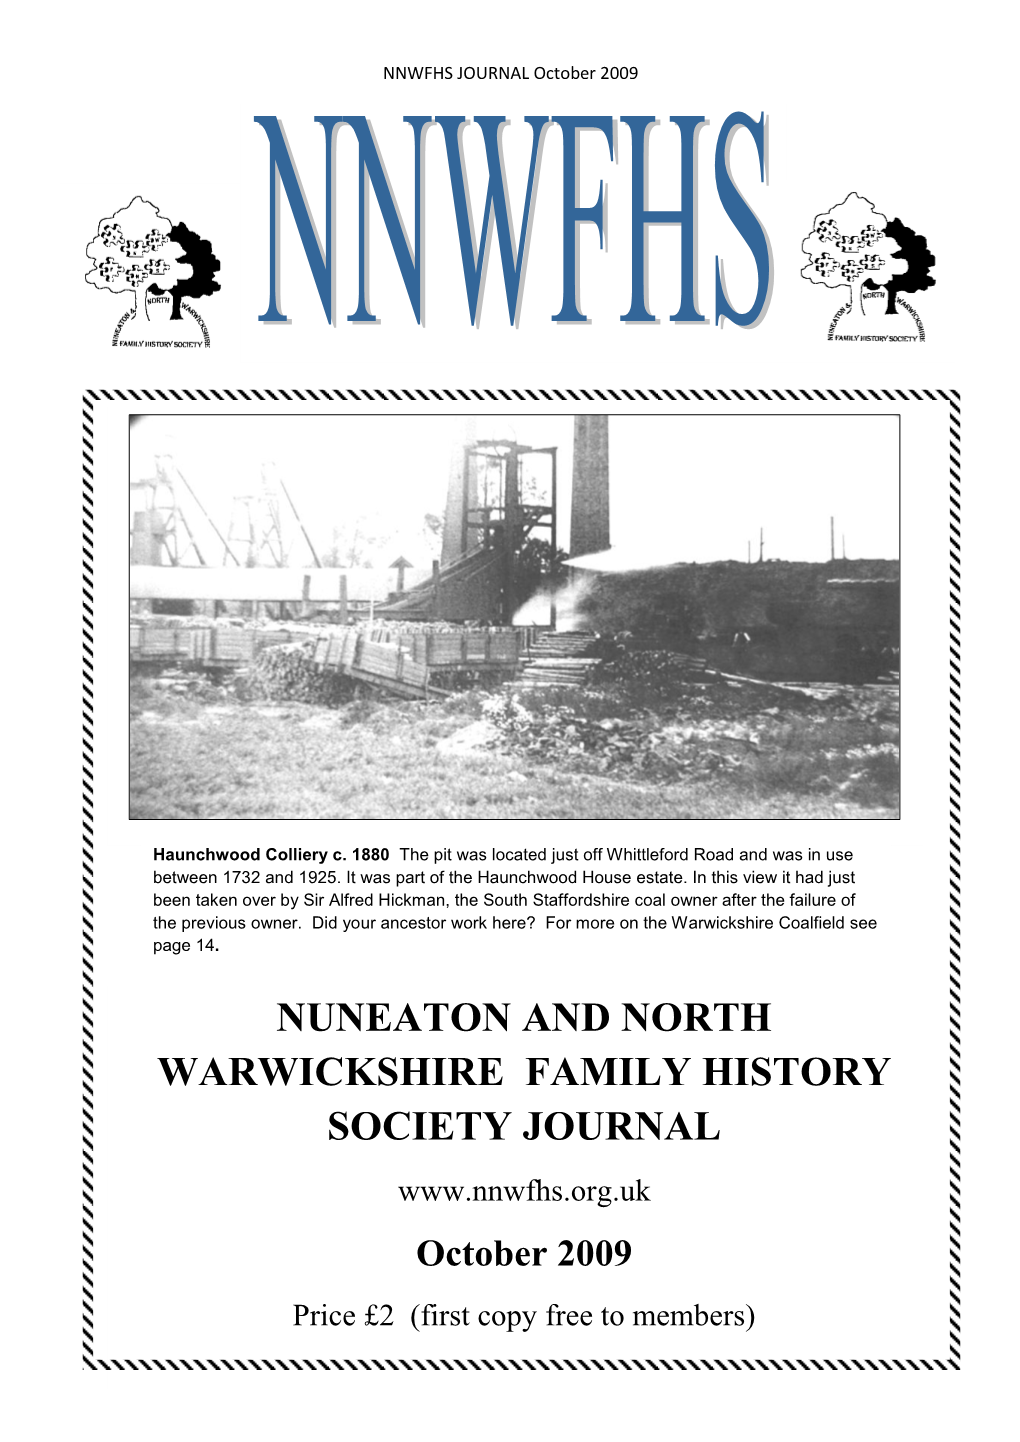 NUNEATON and NORTH WARWICKSHIRE FAMILY HISTORY SOCIETY JOURNAL October 2009 Price £2 (First Copy Free to Members) I